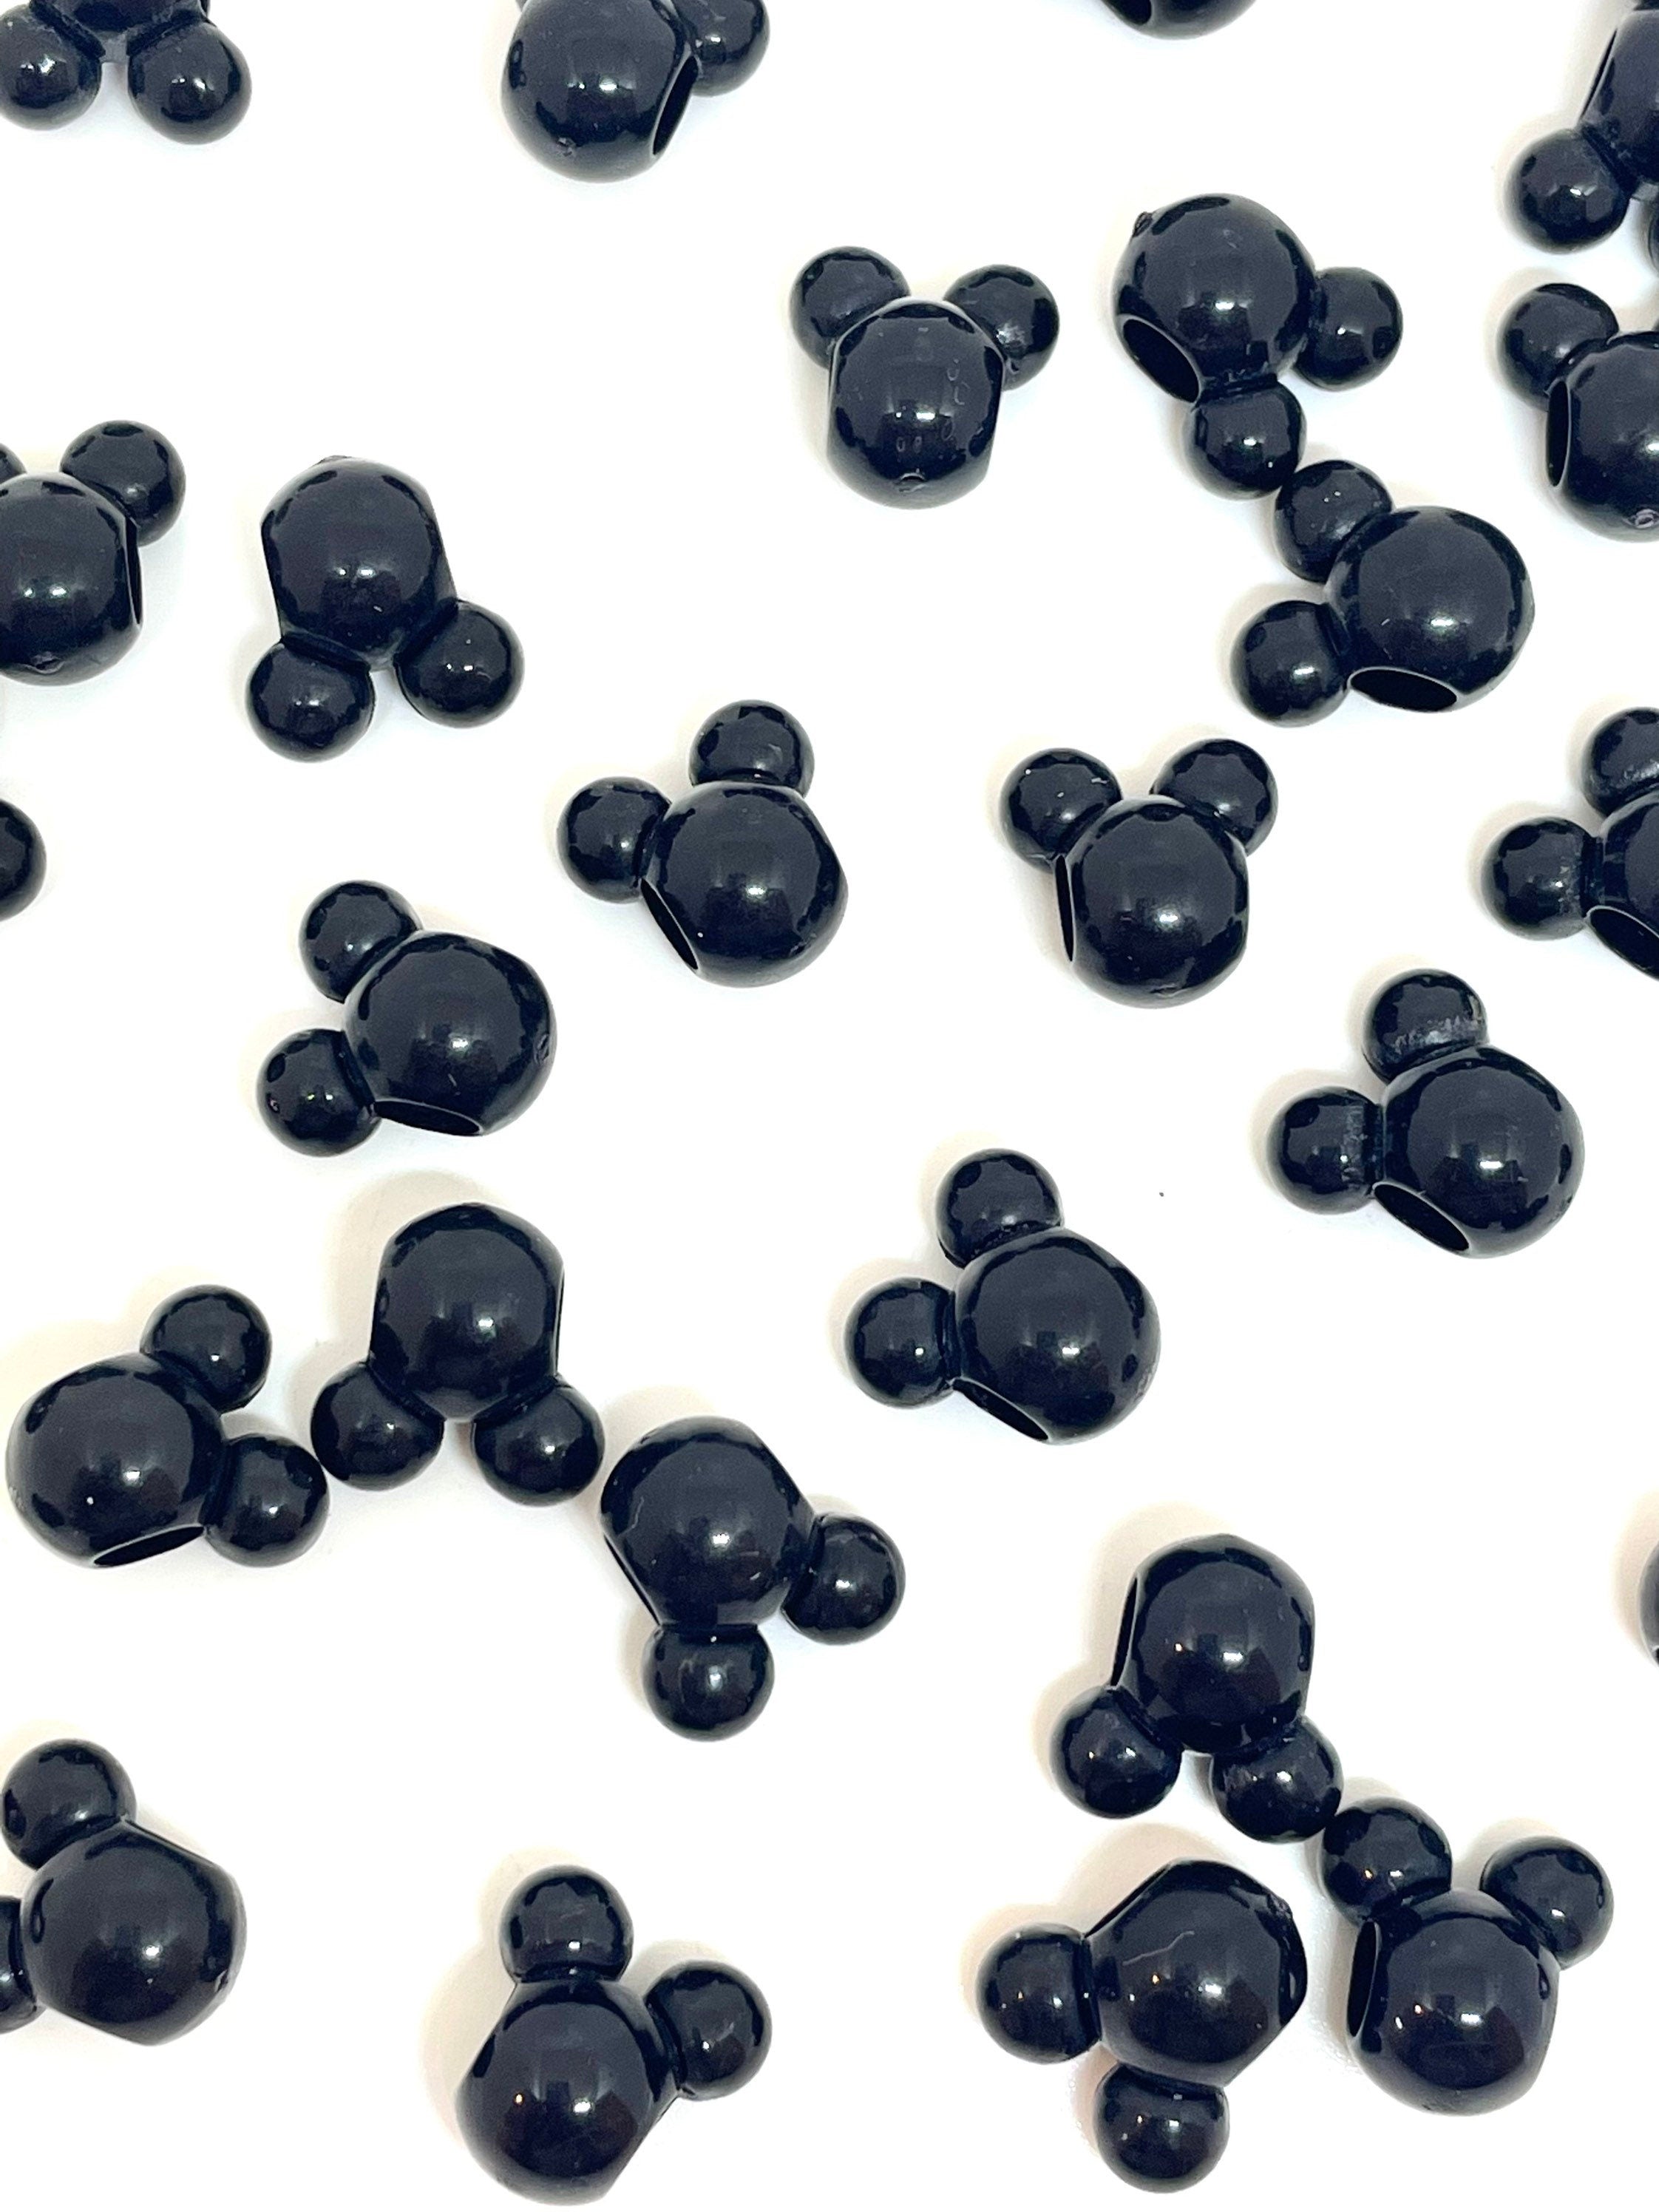 Black Mickey Mouse Beads - Ideal for Disney-Themed Jewelry Creations